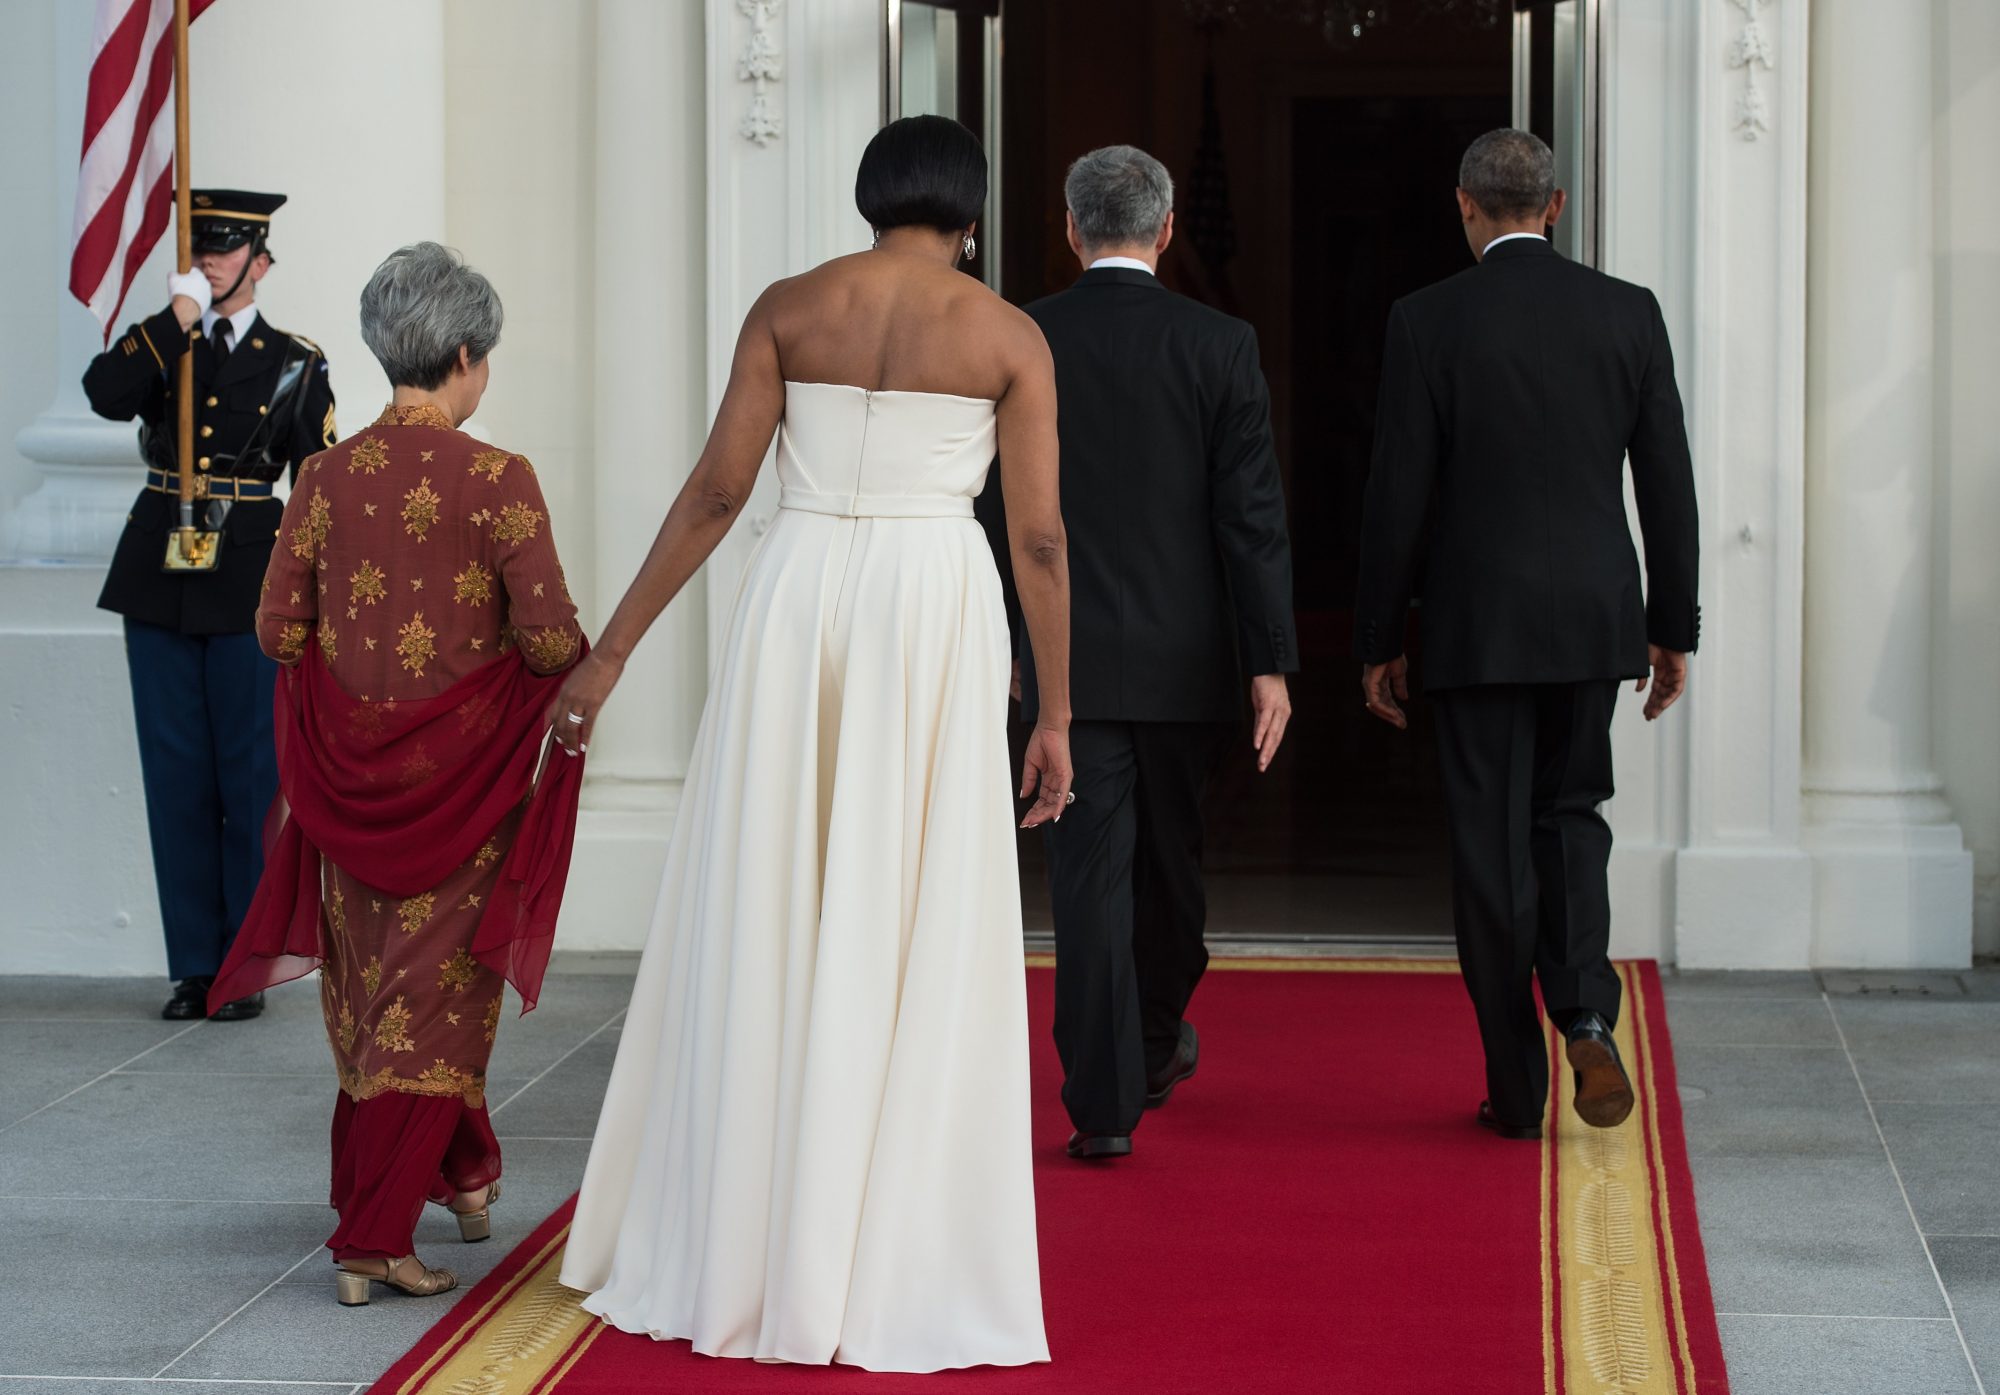 US President Barack Obama (R), First Lady Michelle Obama (2nd L) walk into the White with Singapore's Prime Minister Lee Hsien Loong (2nd R) and his wife Ho Ching (L) for a state dinner at the White House in Washington, DC, on August 2, 2016. / AFP / NICHOLAS KAMM        (Photo credit should read NICHOLAS KAMM/AFP/Getty Images)